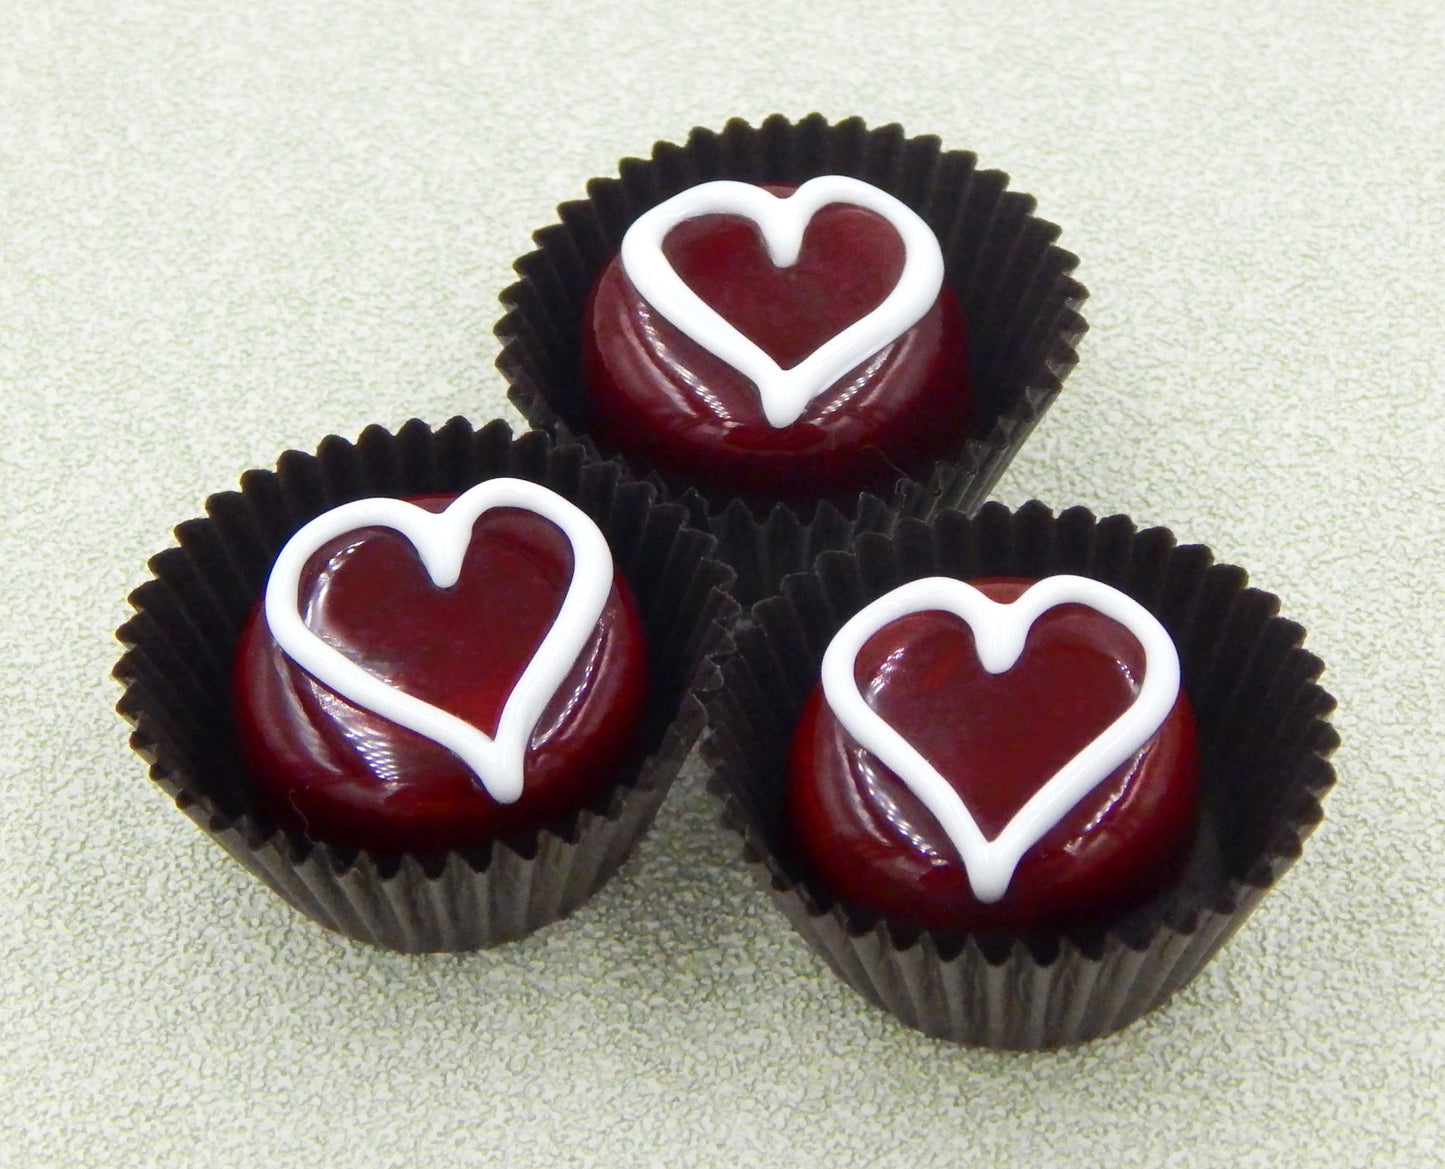 Chocolates with Line Hearts - Assorted Colors (14-011+)